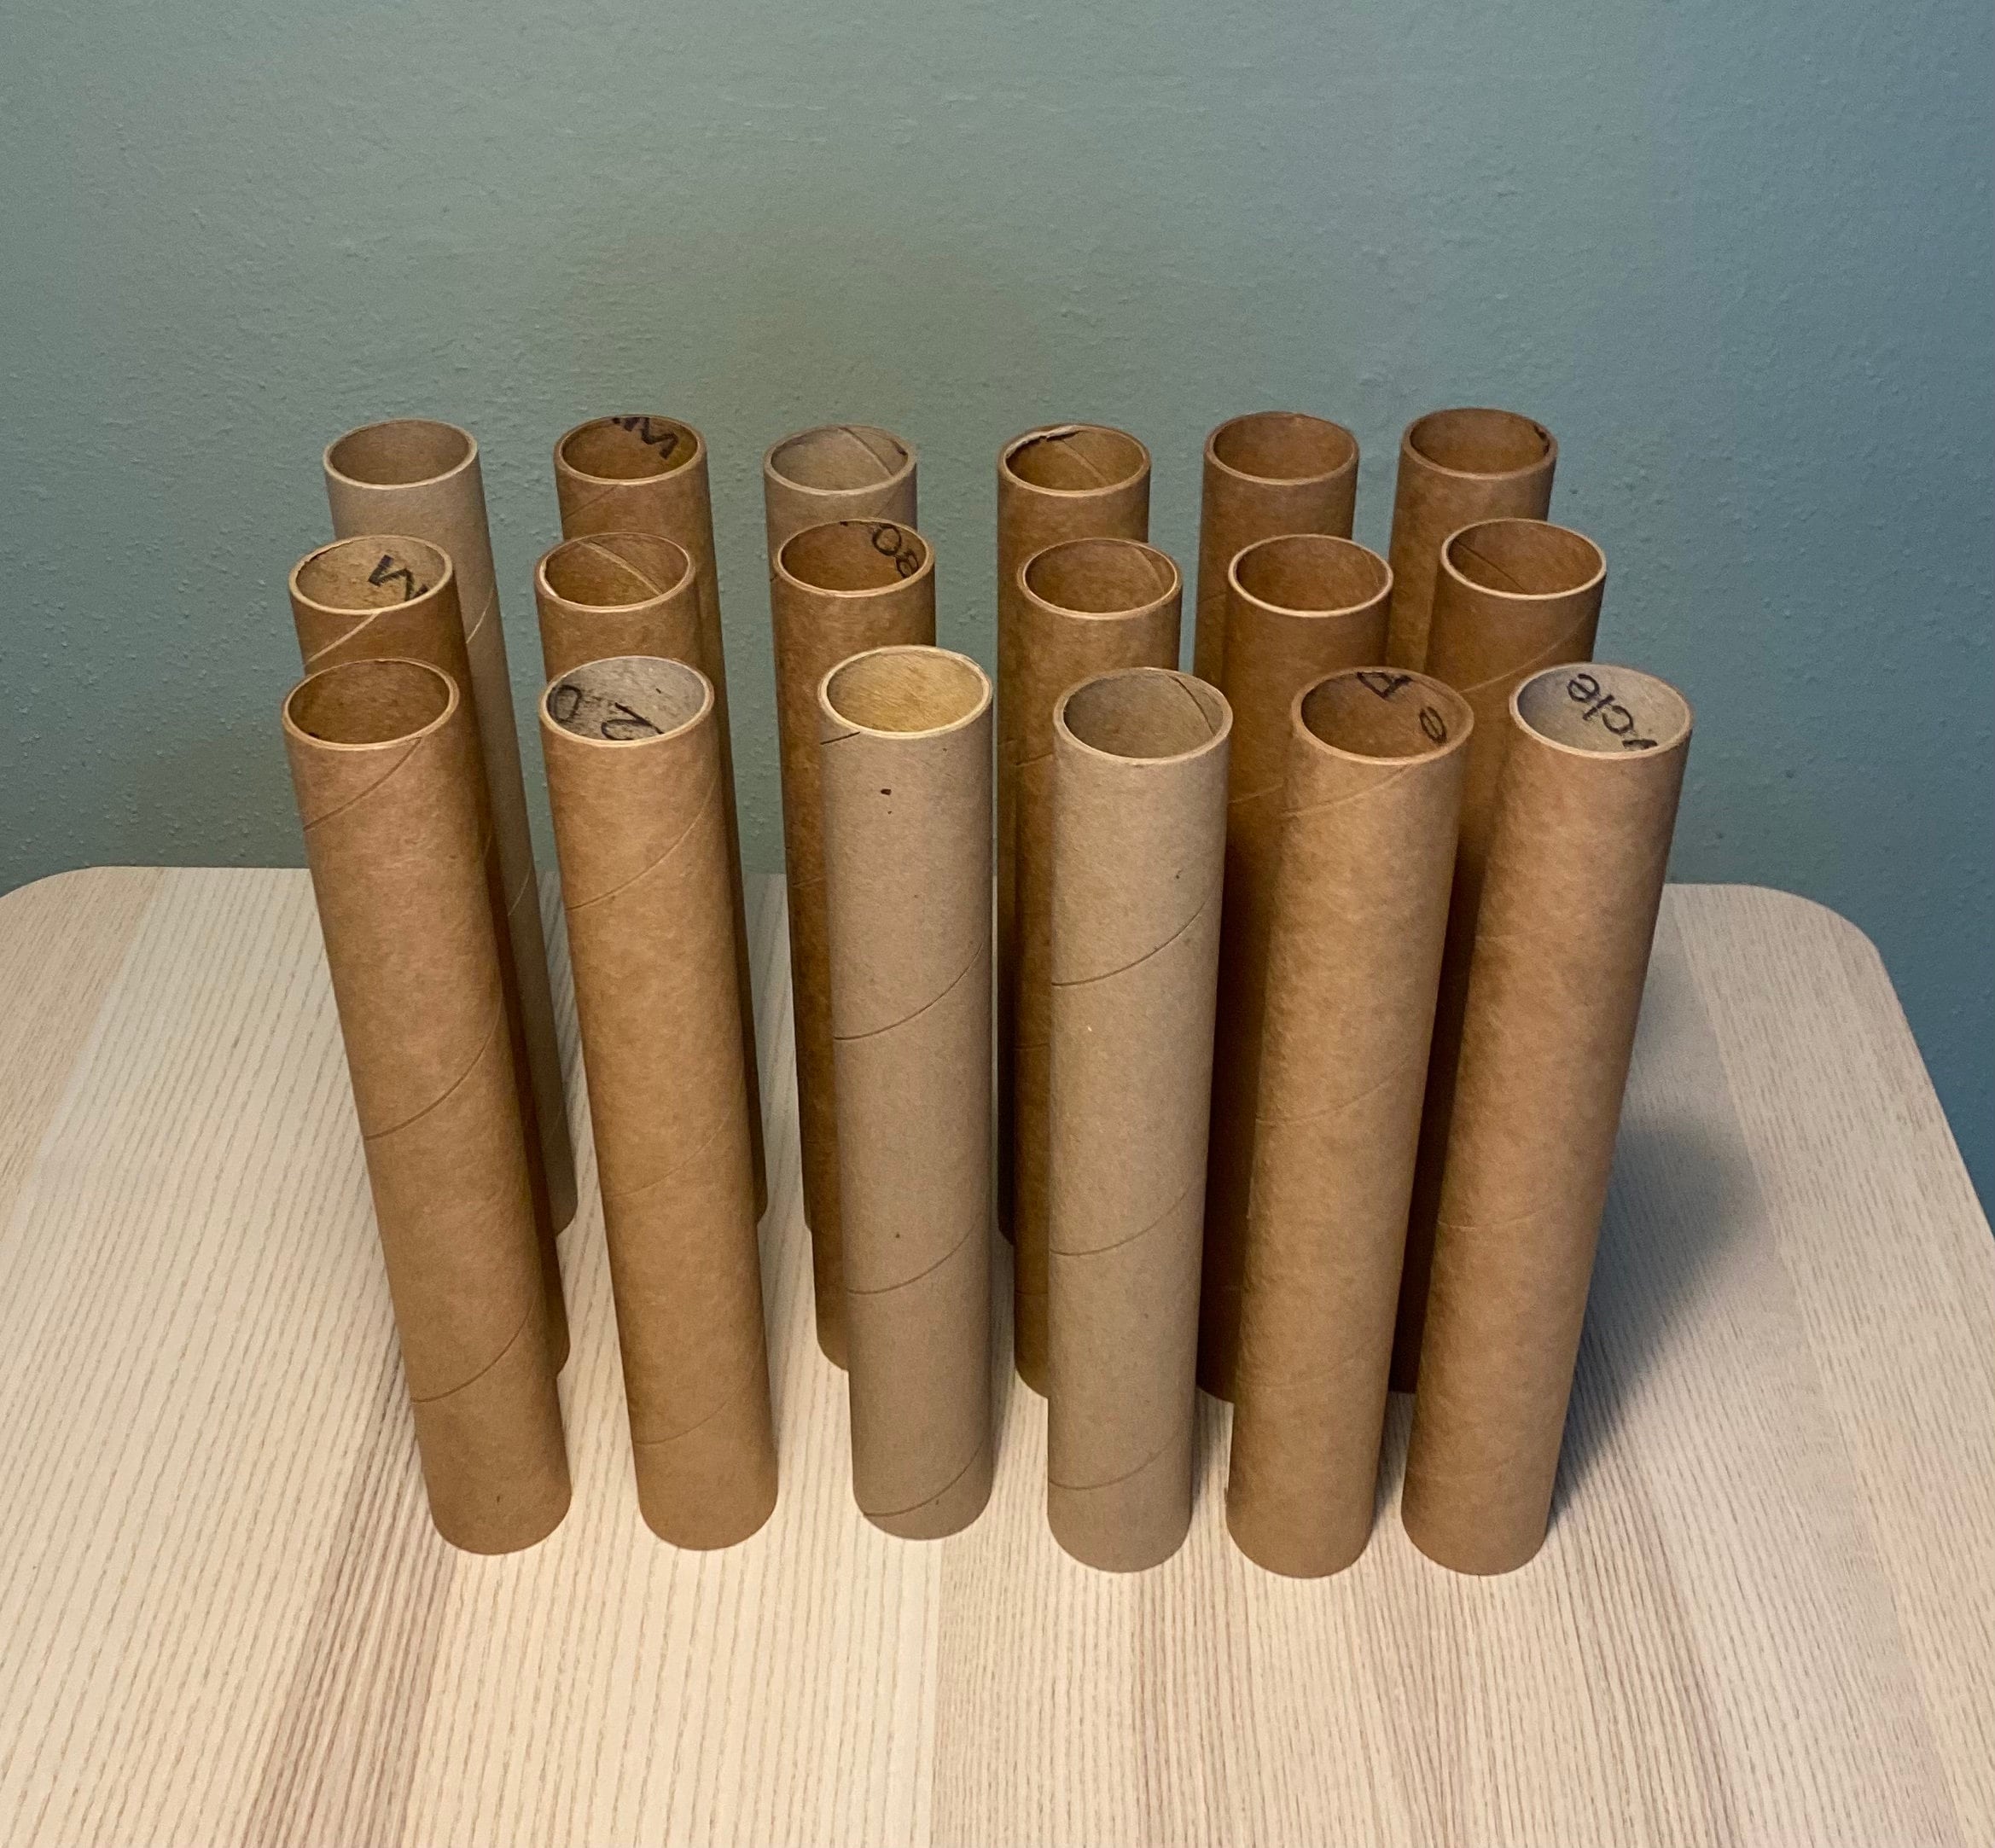 Brown Cardboard Tubes for Crafts, DIY Craft Paper Roll (1.6 x 4.7 in, 36  Pack)